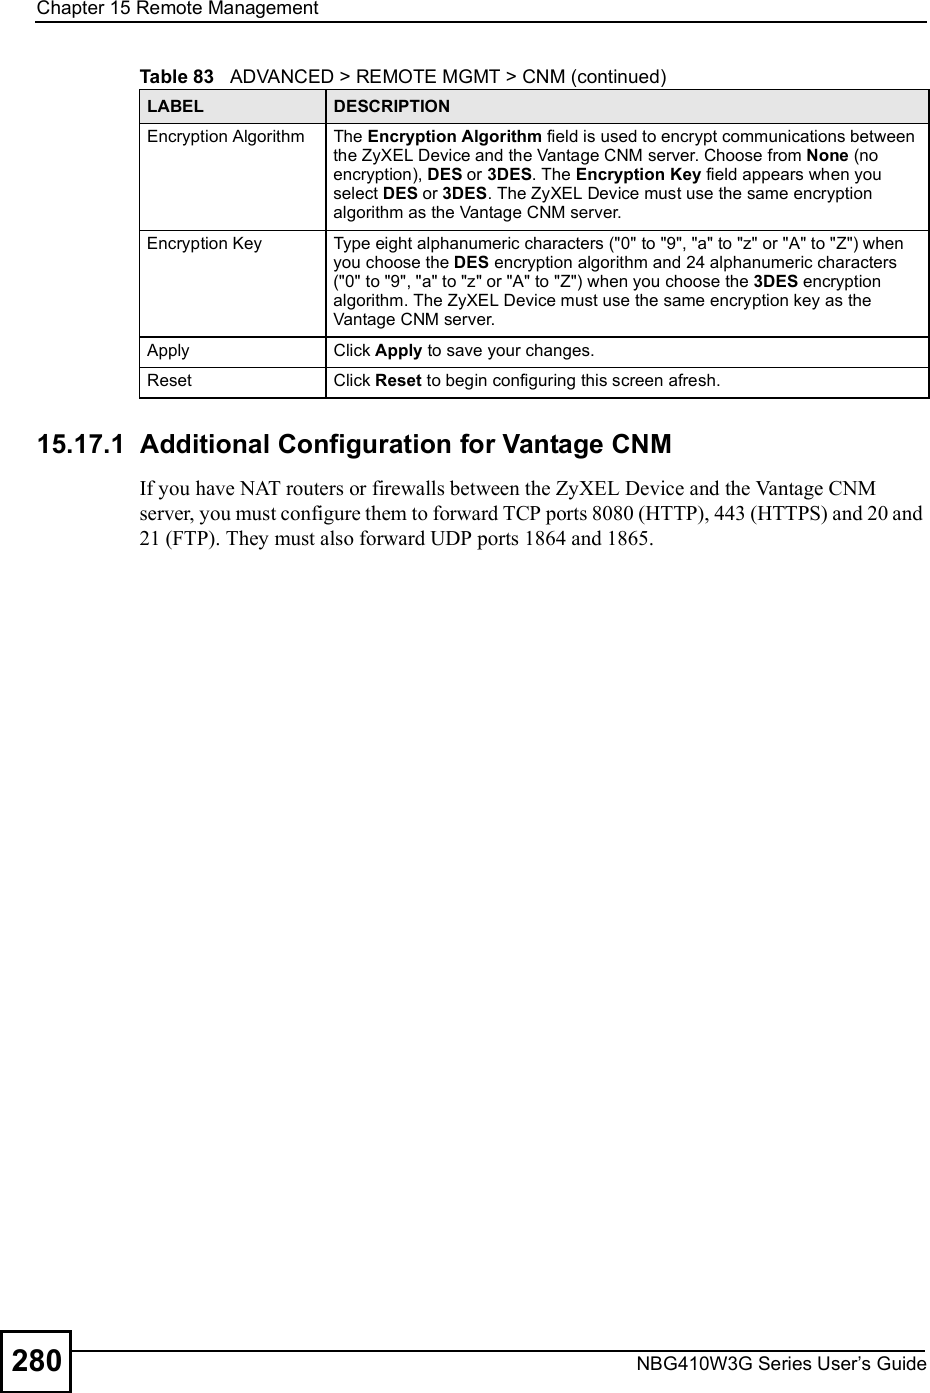 Chapter 15Remote ManagementNBG410W3G Series User s Guide28015.17.1  Additional Configuration for Vantage CNMIf you have NAT routers or firewalls between the ZyXEL Device and the Vantage CNM server, you must configure them to forward TCP ports 8080 (HTTP), 443 (HTTPS) and 20 and 21 (FTP). They must also forward UDP ports 1864 and 1865.Encryption AlgorithmThe Encryption Algorithm field is used to encrypt communications between the ZyXEL Device and the Vantage CNM server. Choose from None (no encryption), DES or 3DES. The Encryption Key field appears when you select DES or 3DES. The ZyXEL Device must use the same encryption algorithm as the Vantage CNM server. Encryption KeyType eight alphanumeric characters (&quot;0&quot; to &quot;9&quot;, &quot;a&quot; to &quot;z&quot; or &quot;A&quot; to &quot;Z&quot;) when you choose the DES encryption algorithm and 24 alphanumeric characters (&quot;0&quot; to &quot;9&quot;, &quot;a&quot; to &quot;z&quot; or &quot;A&quot; to &quot;Z&quot;) when you choose the 3DES encryption algorithm. The ZyXEL Device must use the same encryption key as the Vantage CNM server. Apply Click Apply to save your changes.Reset Click Reset to begin configuring this screen afresh.Table 83   ADVANCED &gt; REMOTE MGMT &gt; CNM (continued)LABEL DESCRIPTION